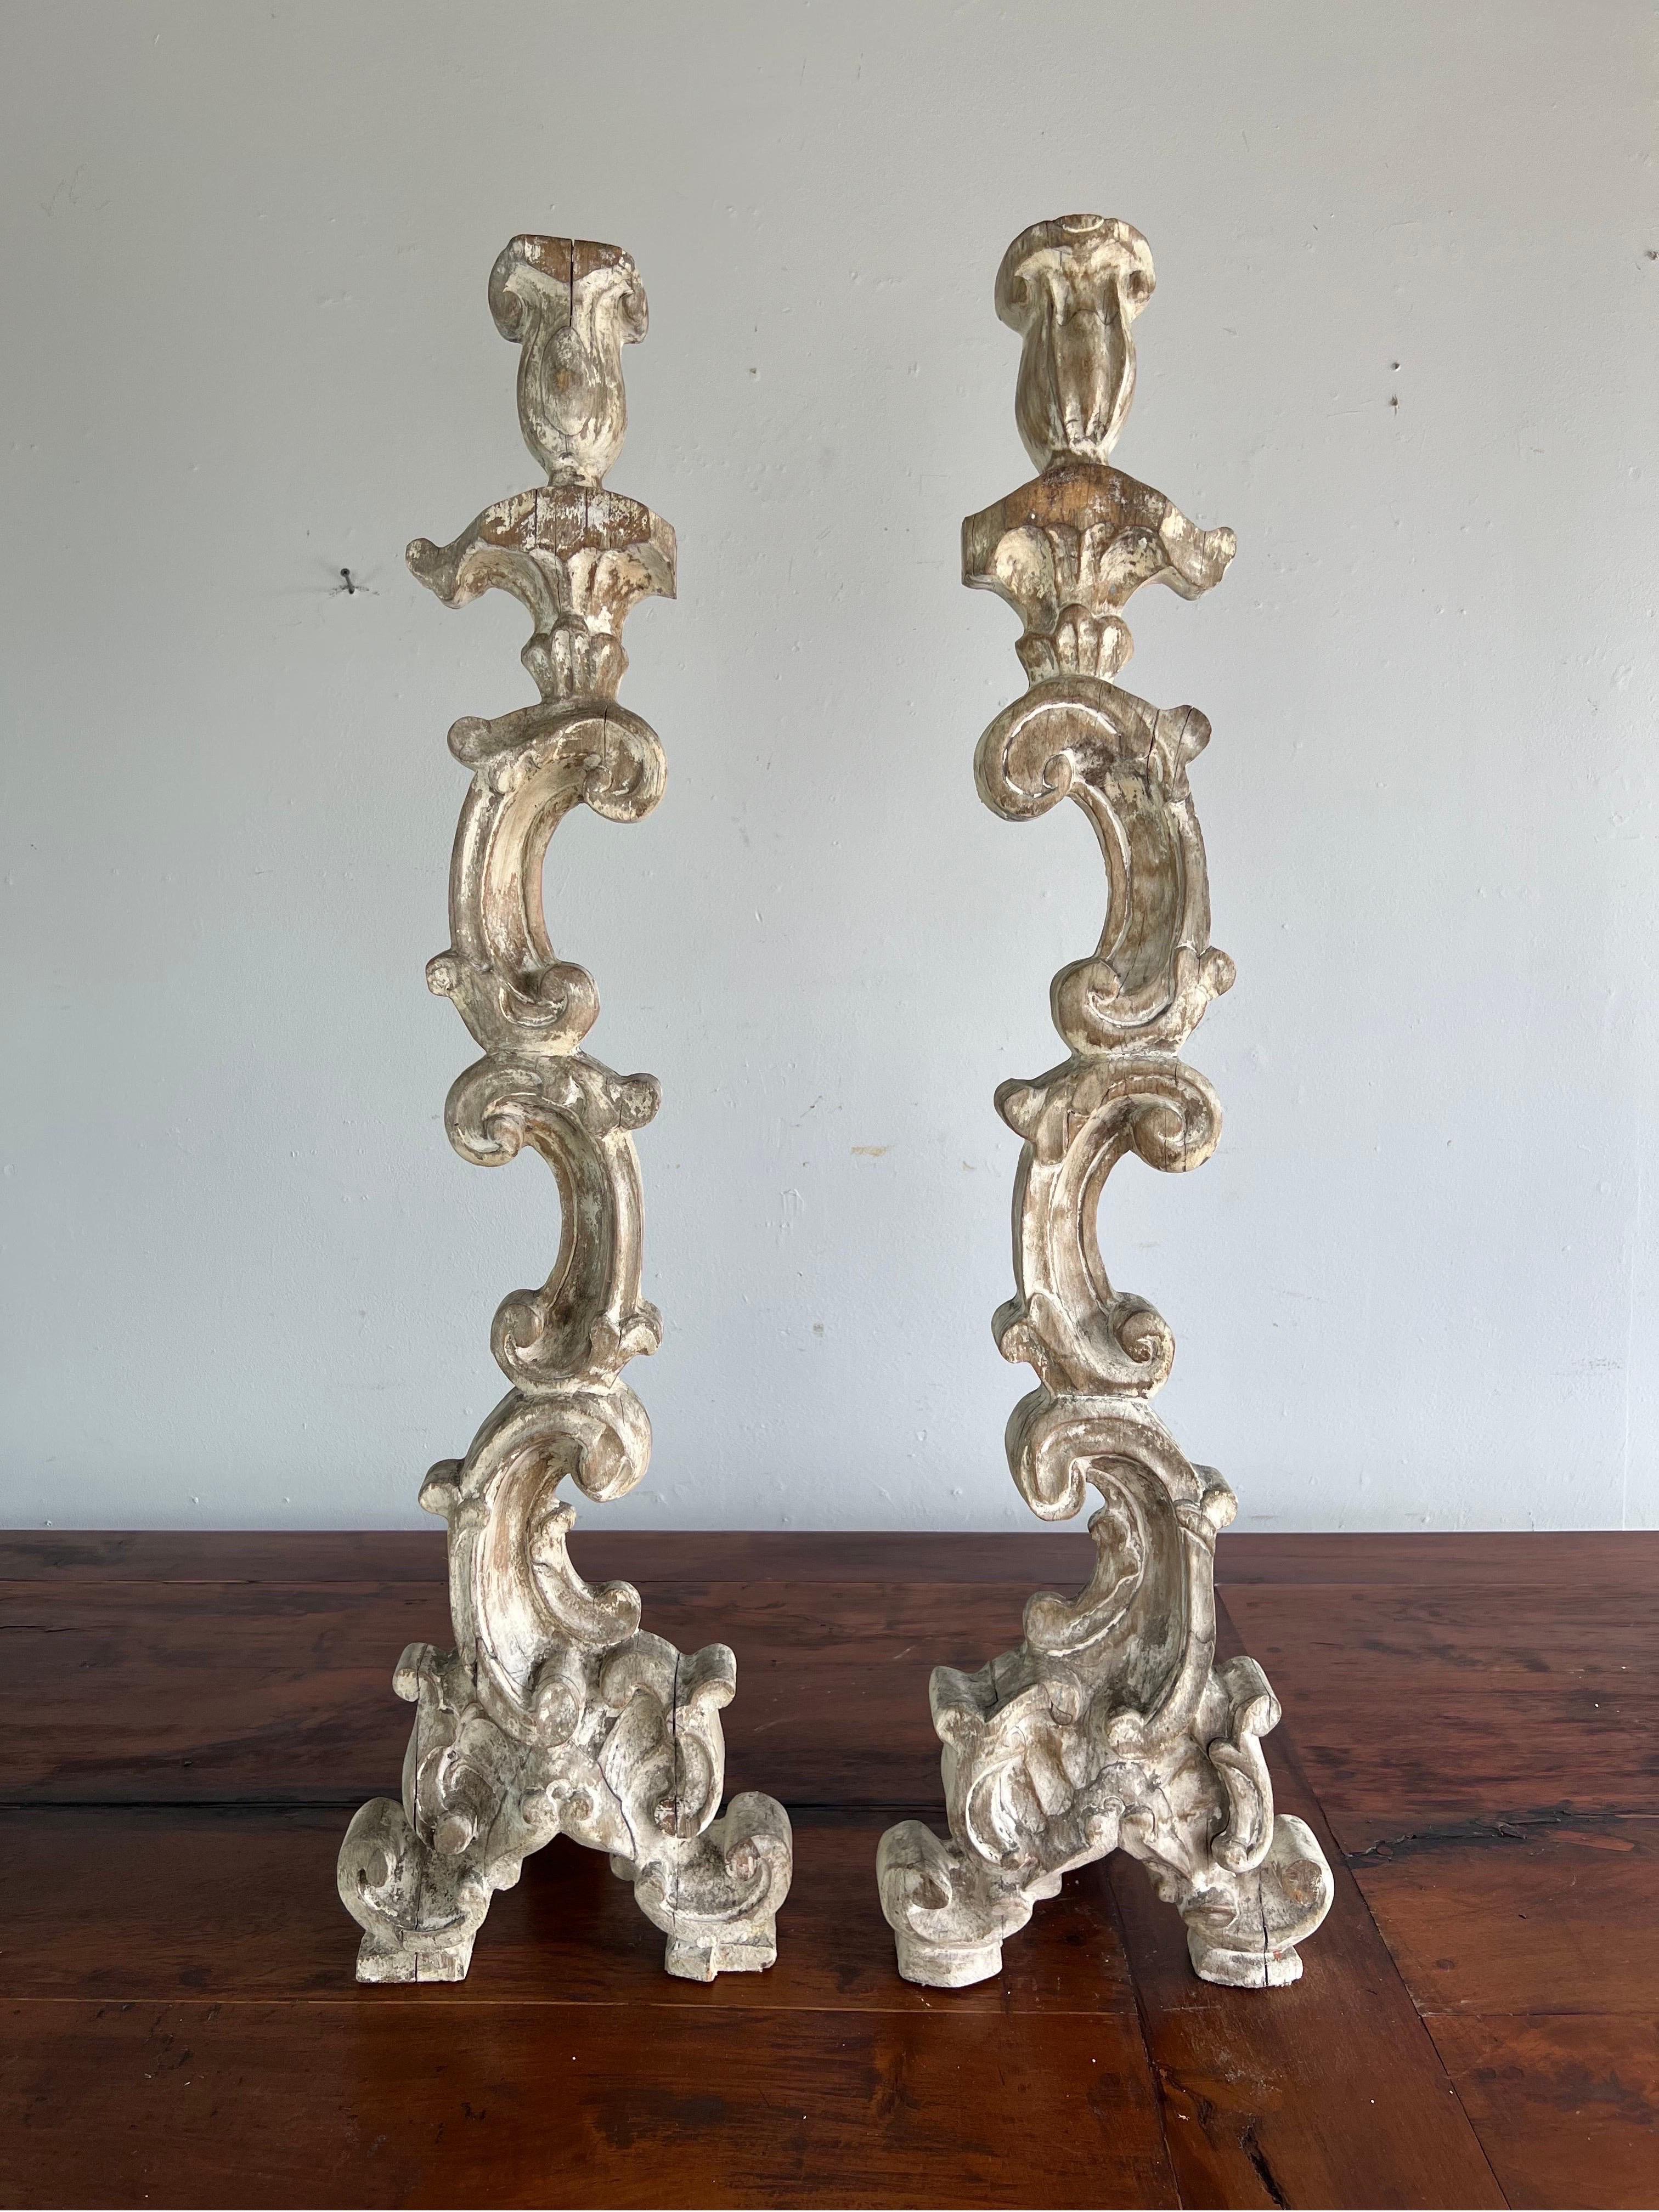 Monumental size Italian painted candlesticks. The candlesticks are beautifully carved depicting connecting acanthus leaves throughout. The paint is softly worn and is an antique white and gray coloration.